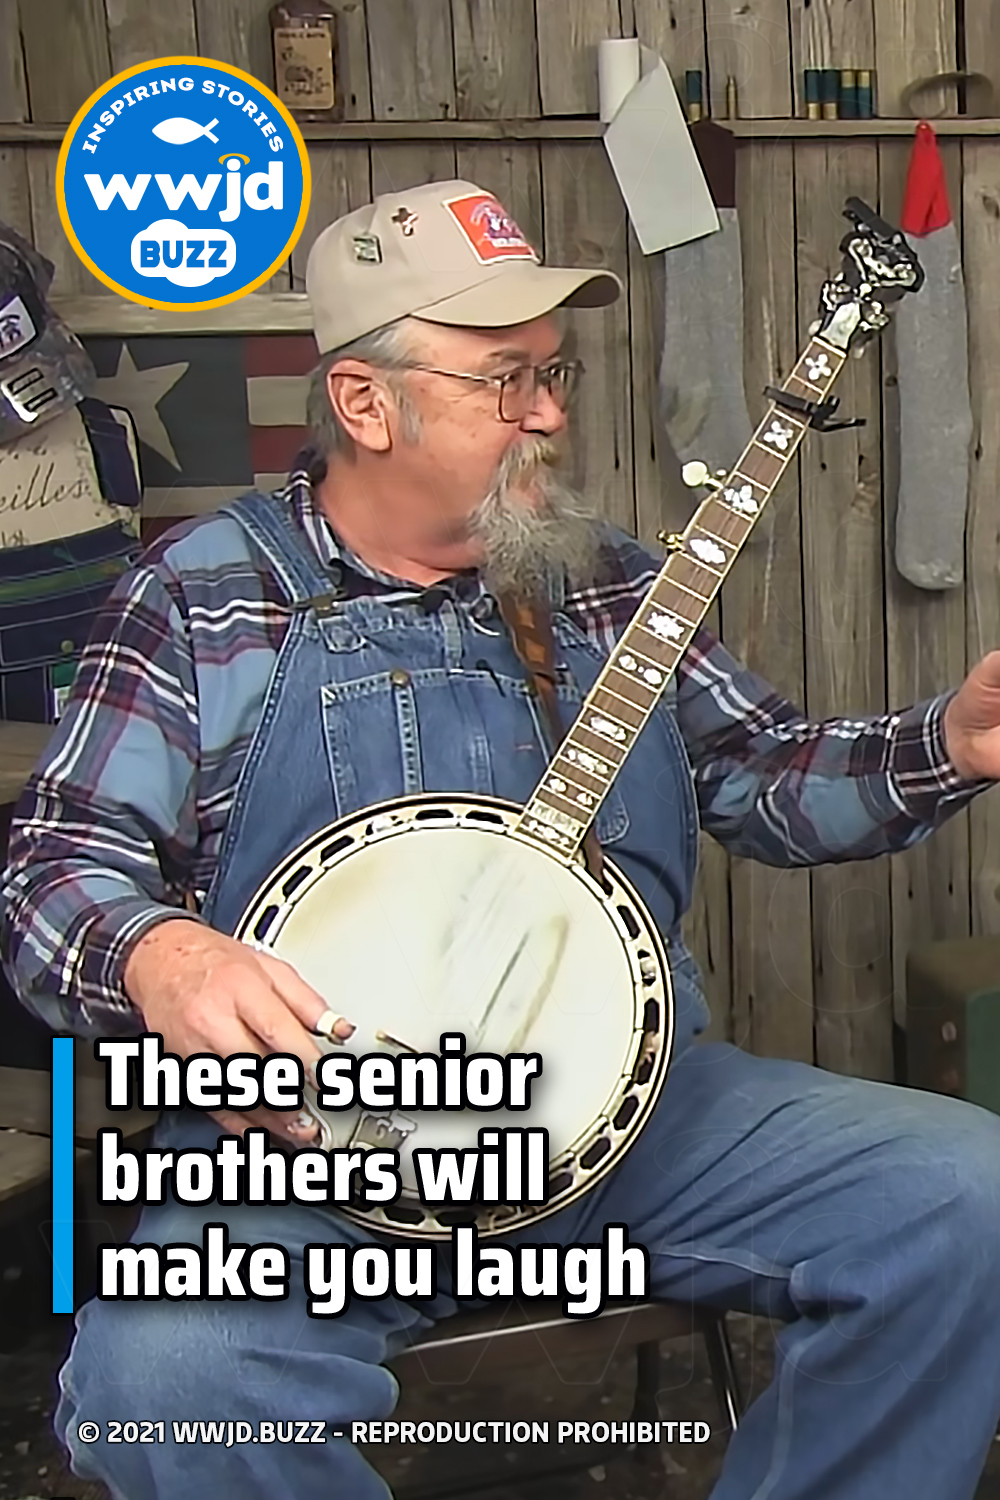 These senior brothers will make you laugh